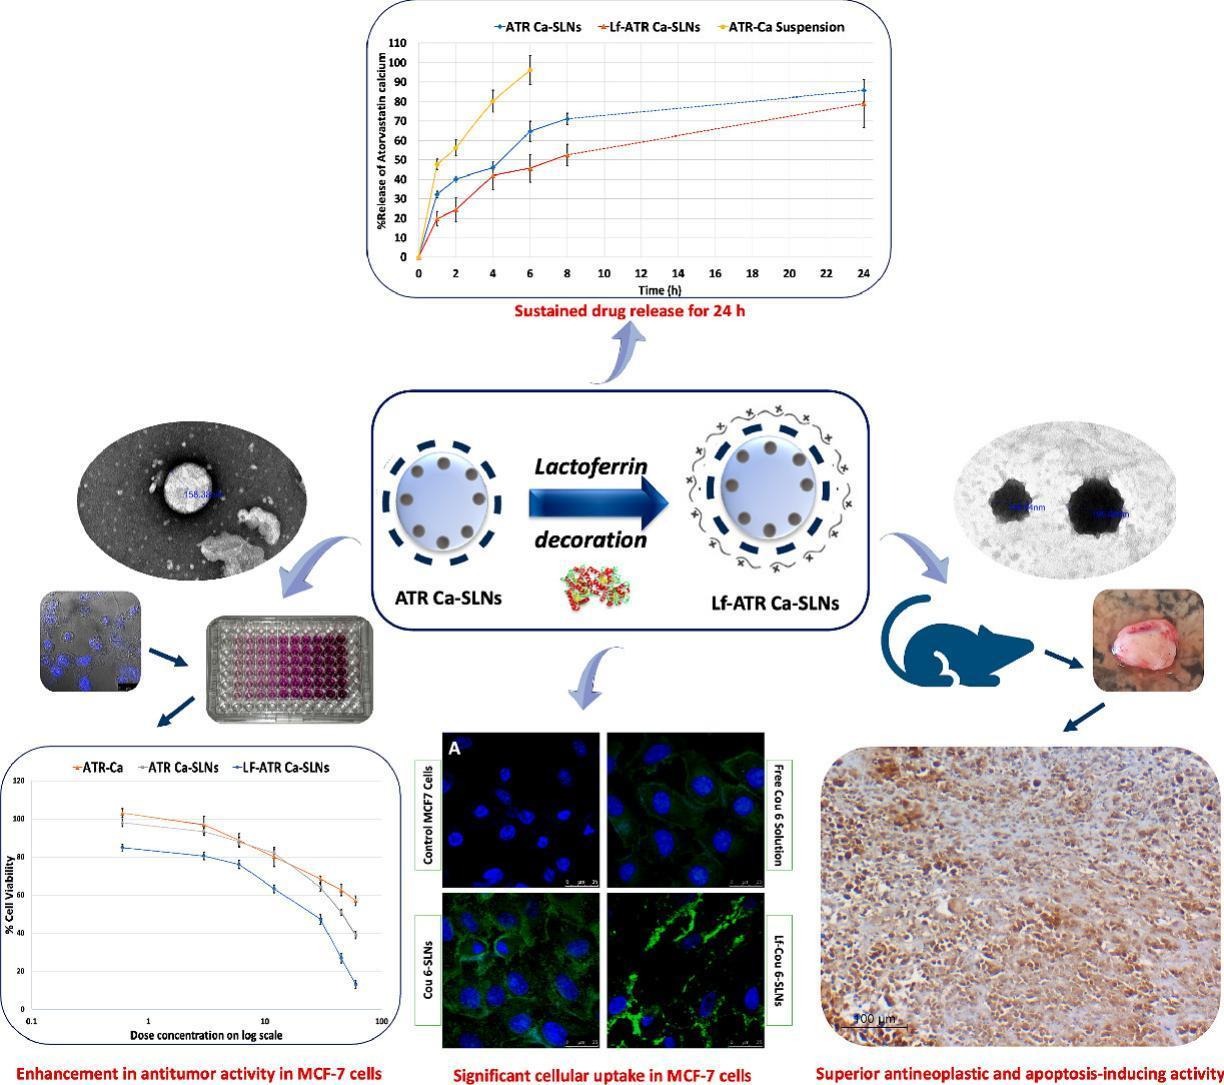 A drug repurposing approach of Atorvastatin calcium for its antiproliferative activity for effective treatment of breast cancer: In vitro and in vivo assessment